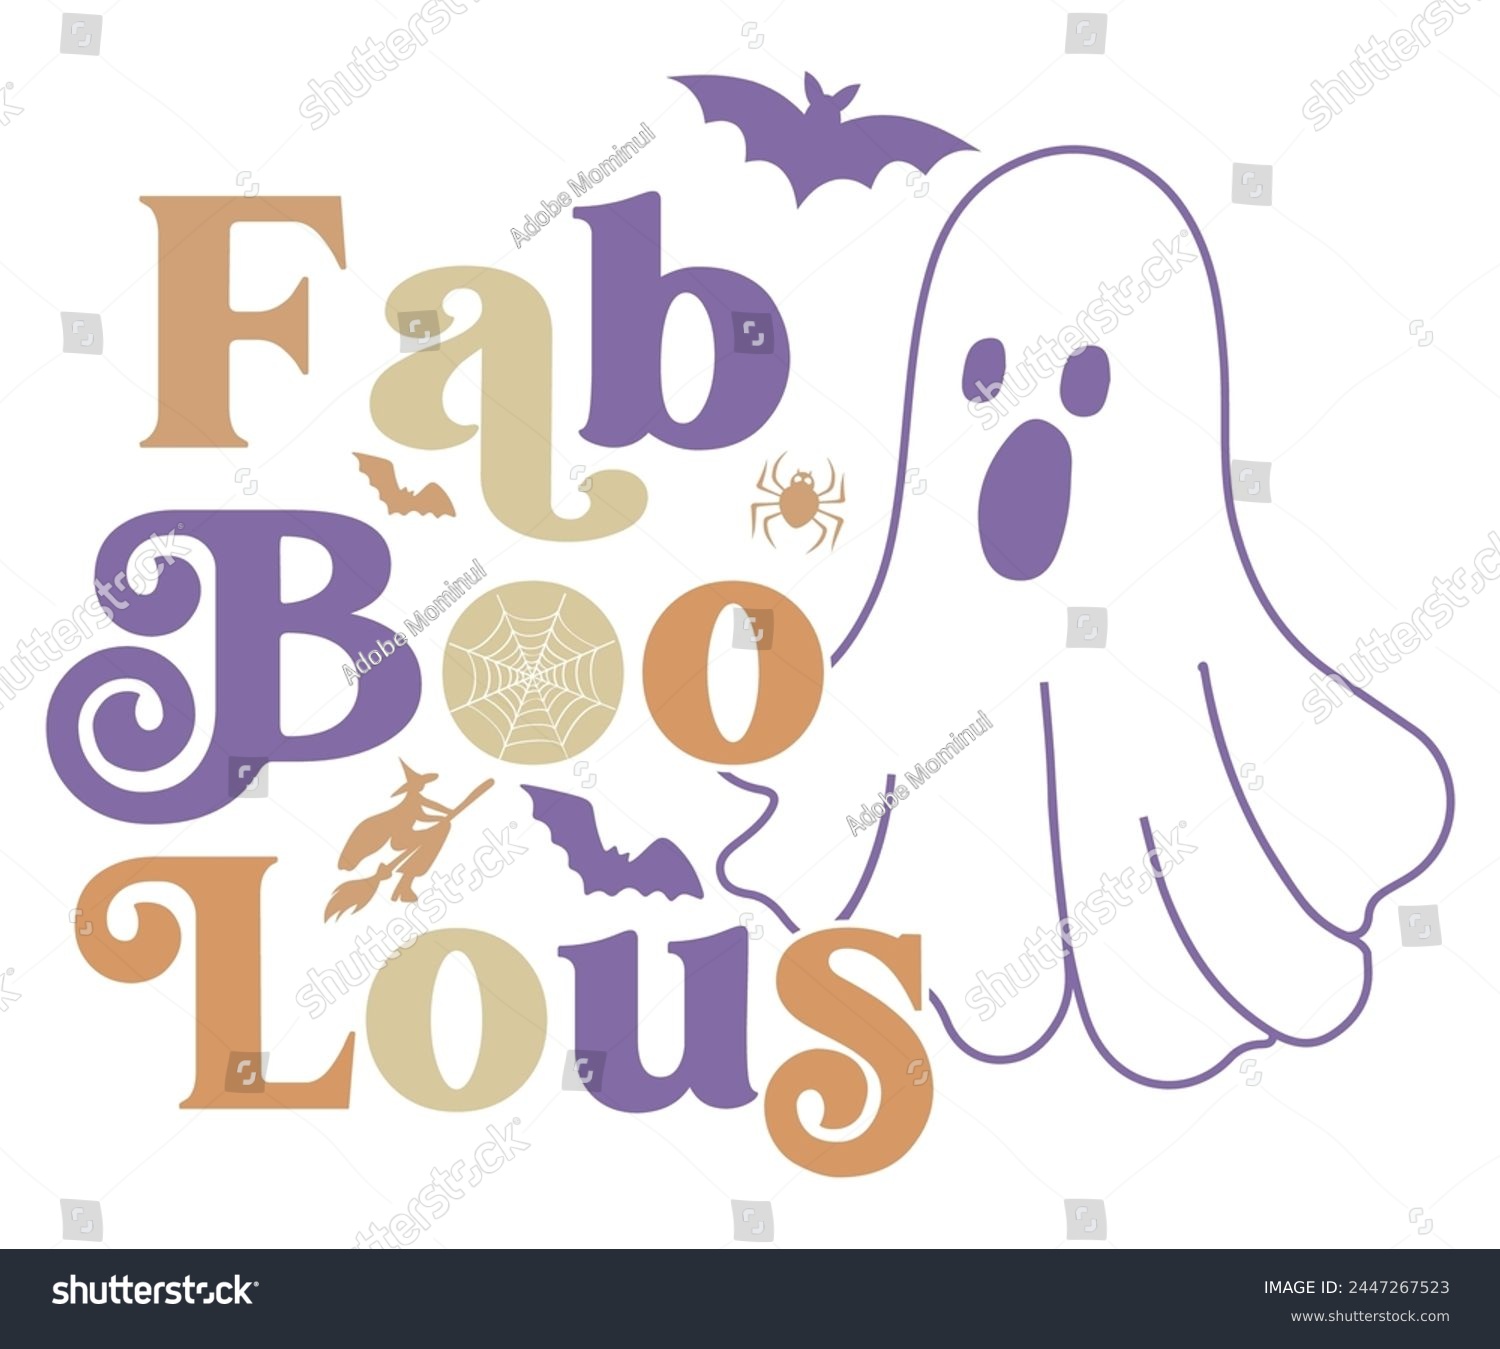 SVG of Fab Boo Lous Retro,Halloween Svg,Typography,Halloween Quotes,Witches Svg,Halloween Party,Halloween Costume,Halloween Gift,Funny Halloween,Spooky Svg,Funny T shirt,Ghost Svg,Cut file svg